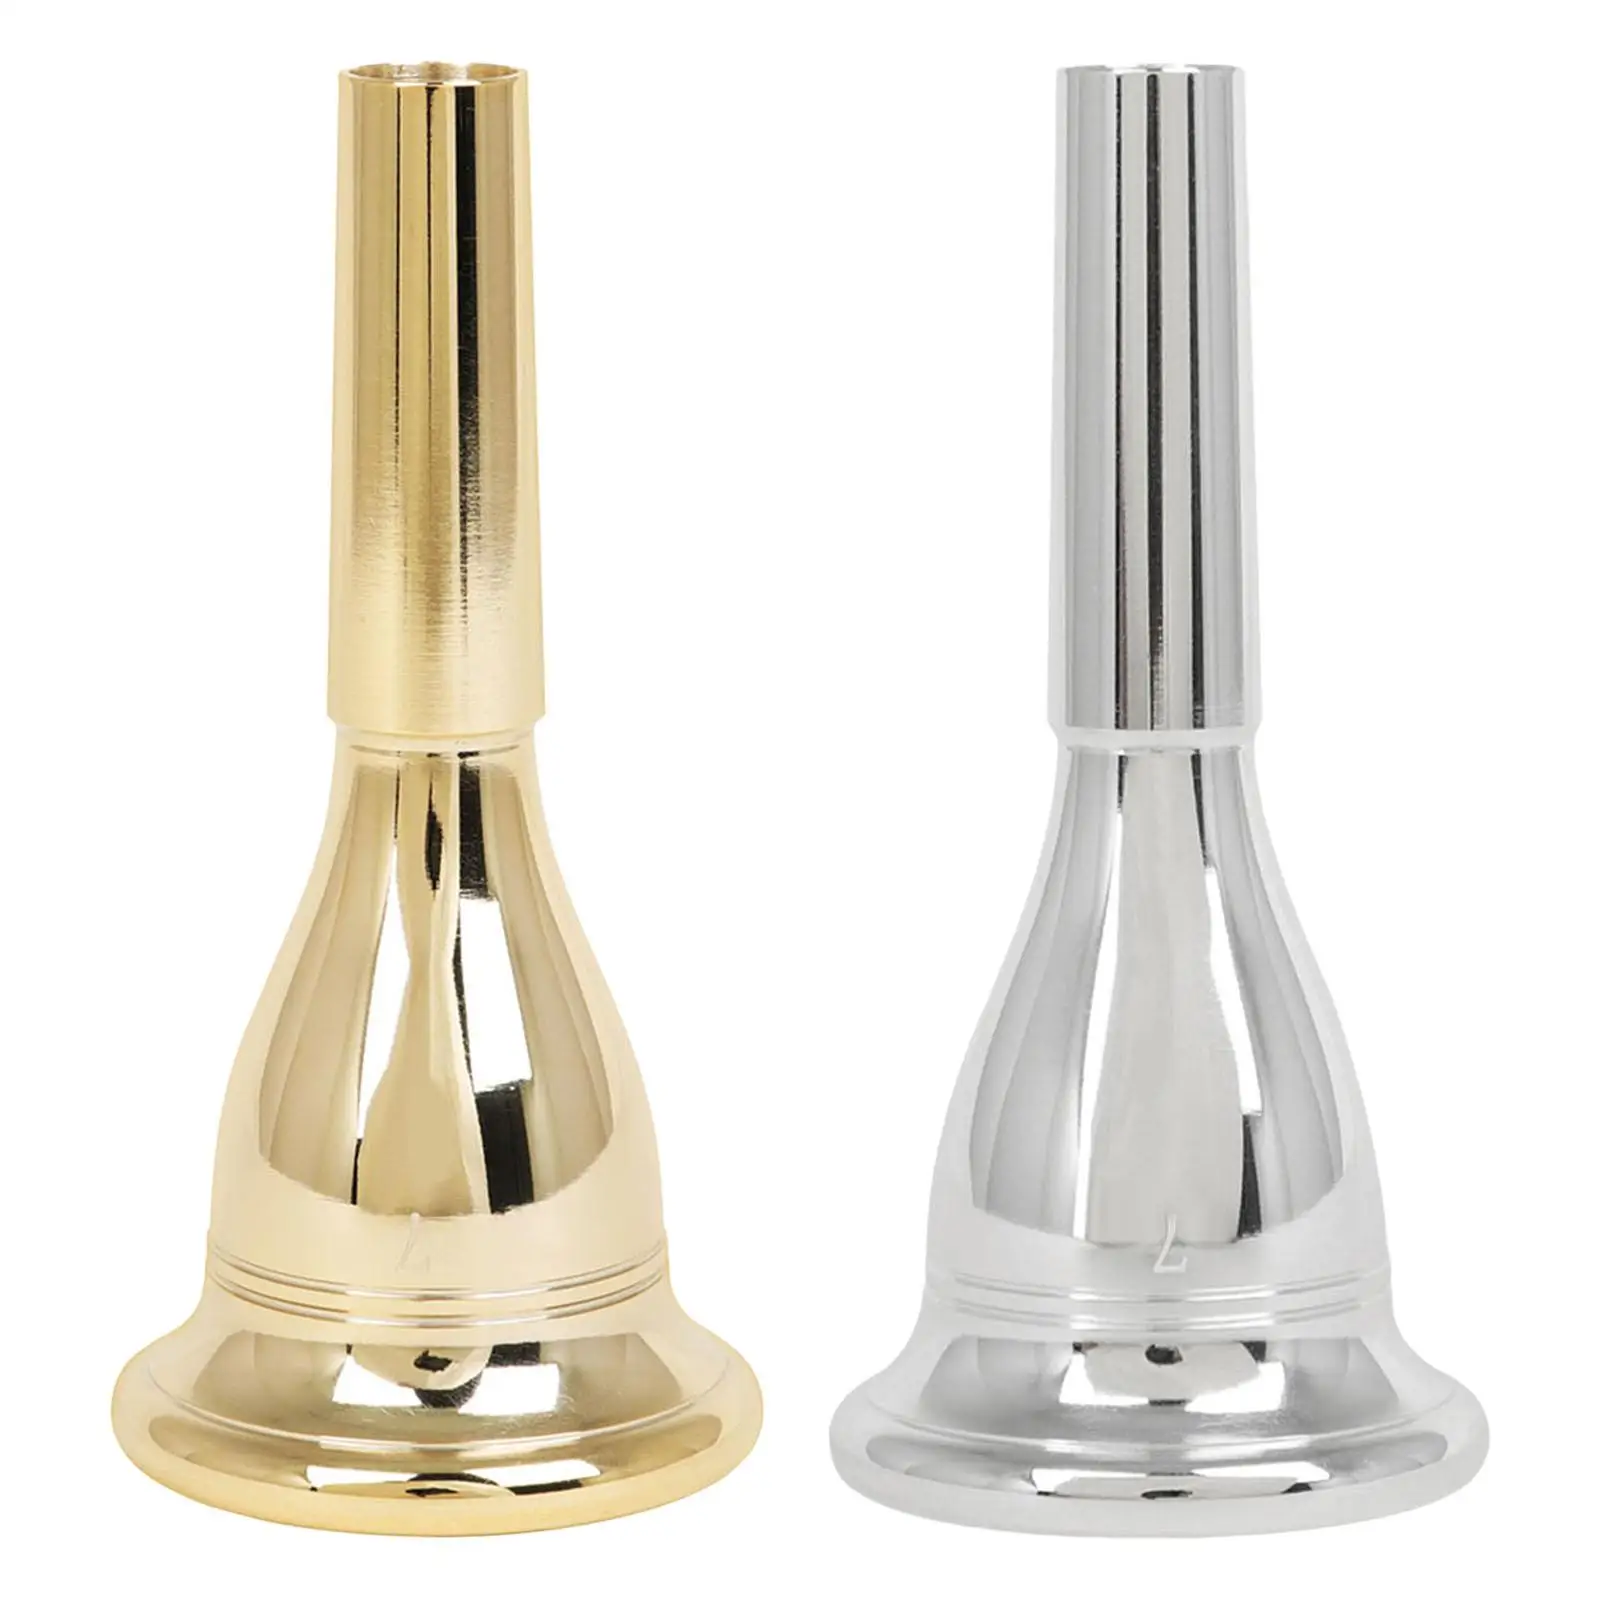 Brass Tuba Mouthpiece Instrument Accessories Musical Players